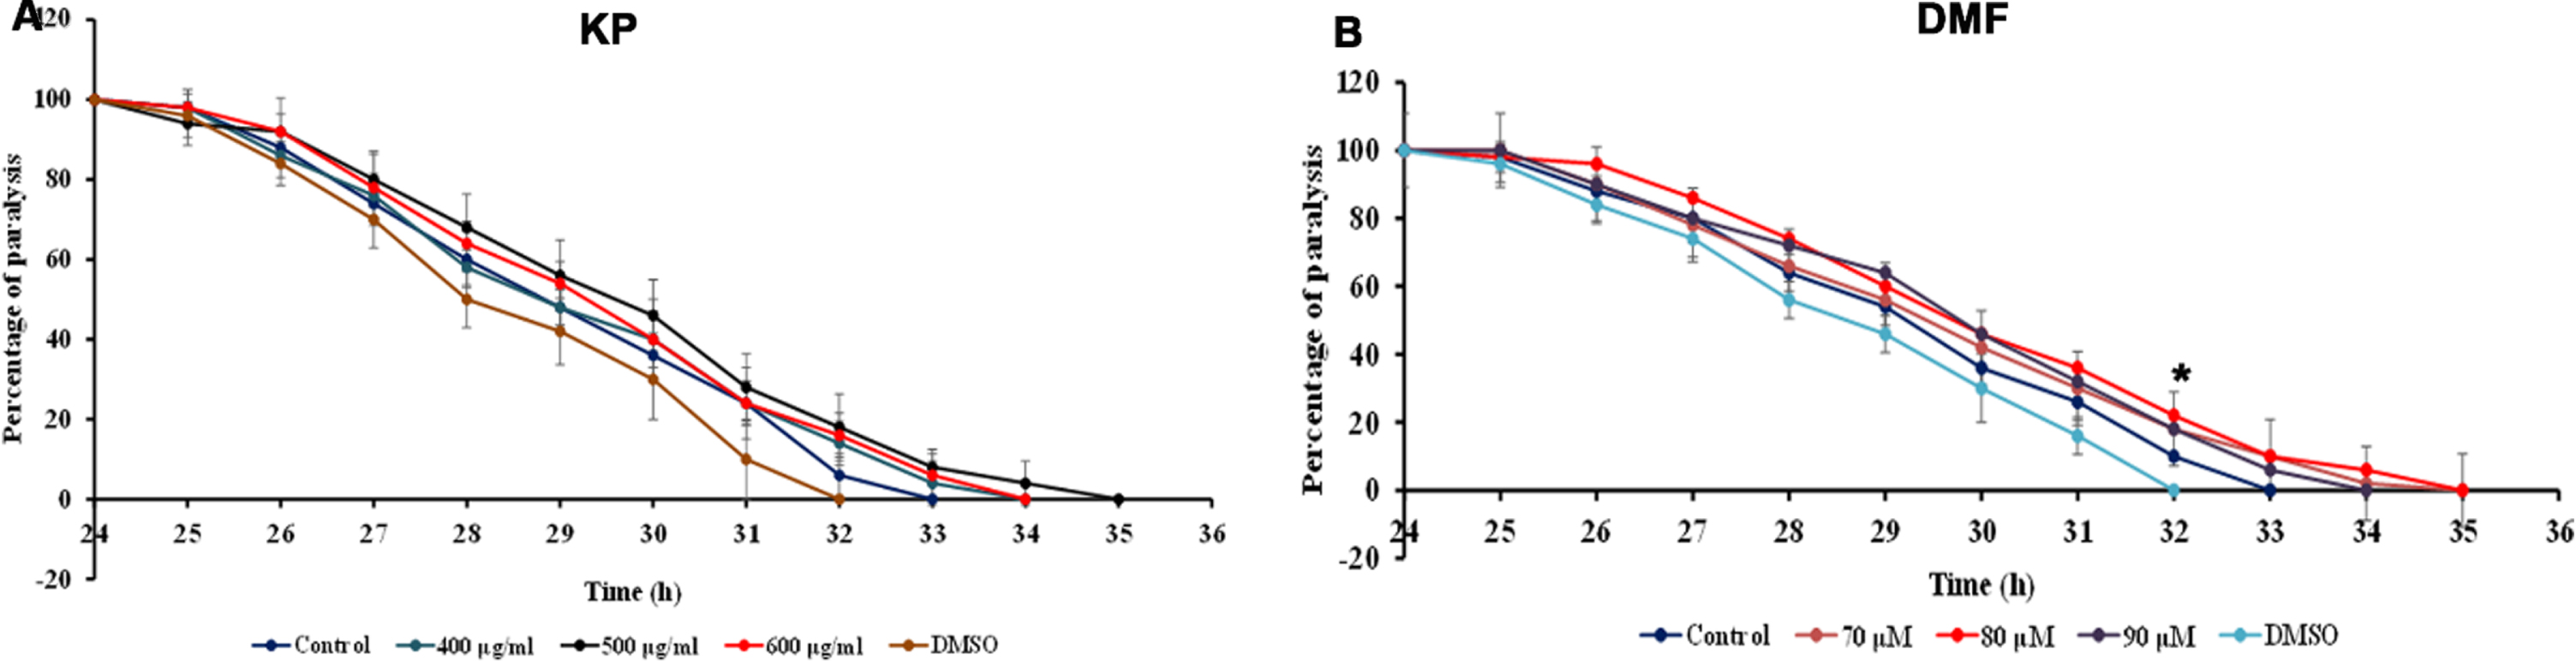 Effect of KP and DMF on paralysis in Aβ transgenic strain CL4176 (A) KP 400 –600μg/ml (B) DMF 70 –90μM. Treatment with KP and DMF significantly (p <  0.05) diminished Aβ-induced paralysis when compared to control.